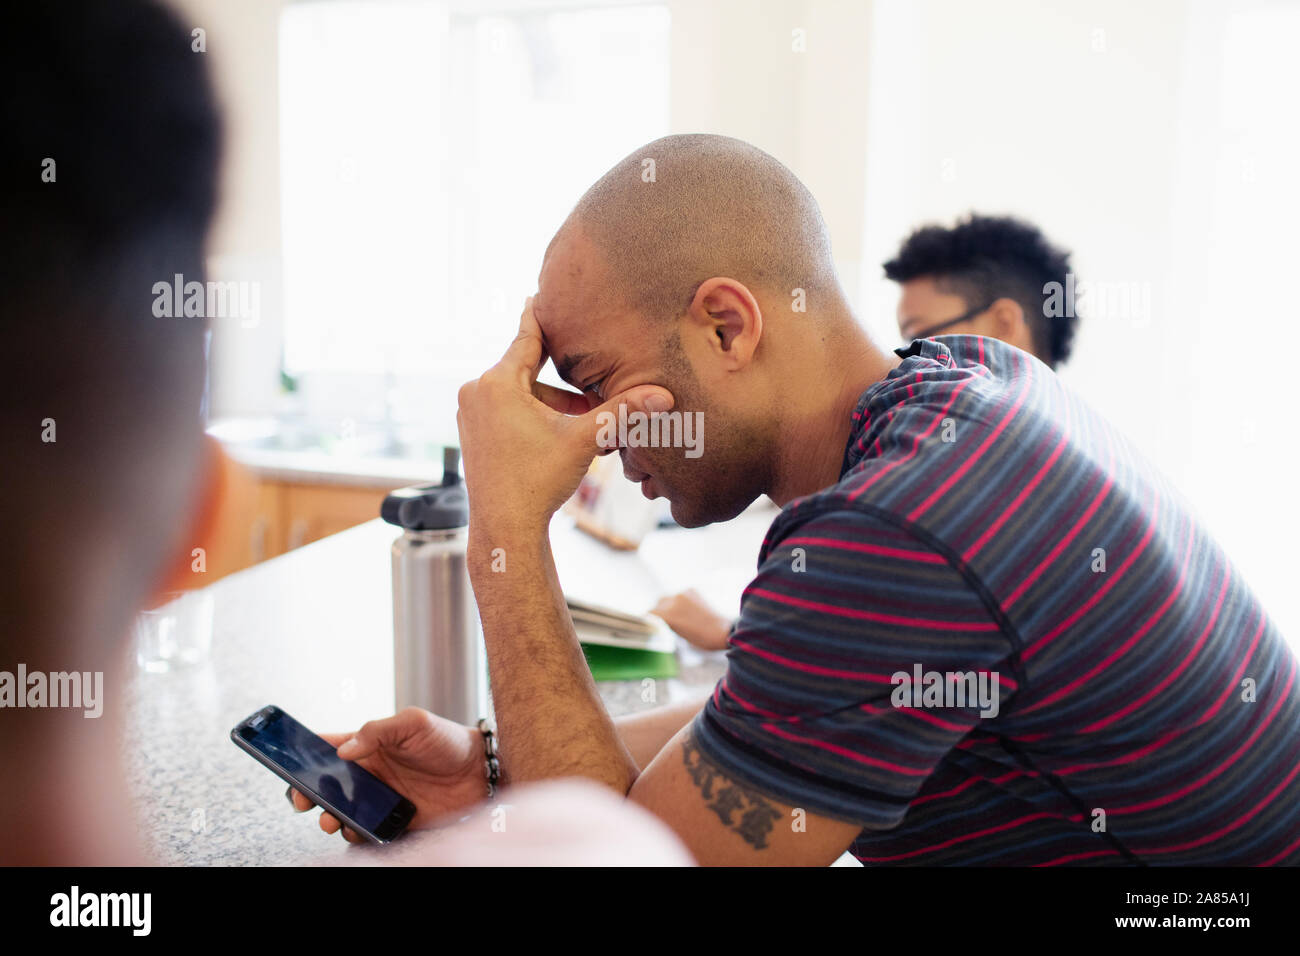 Man with head in hands using smart phone Stock Photo